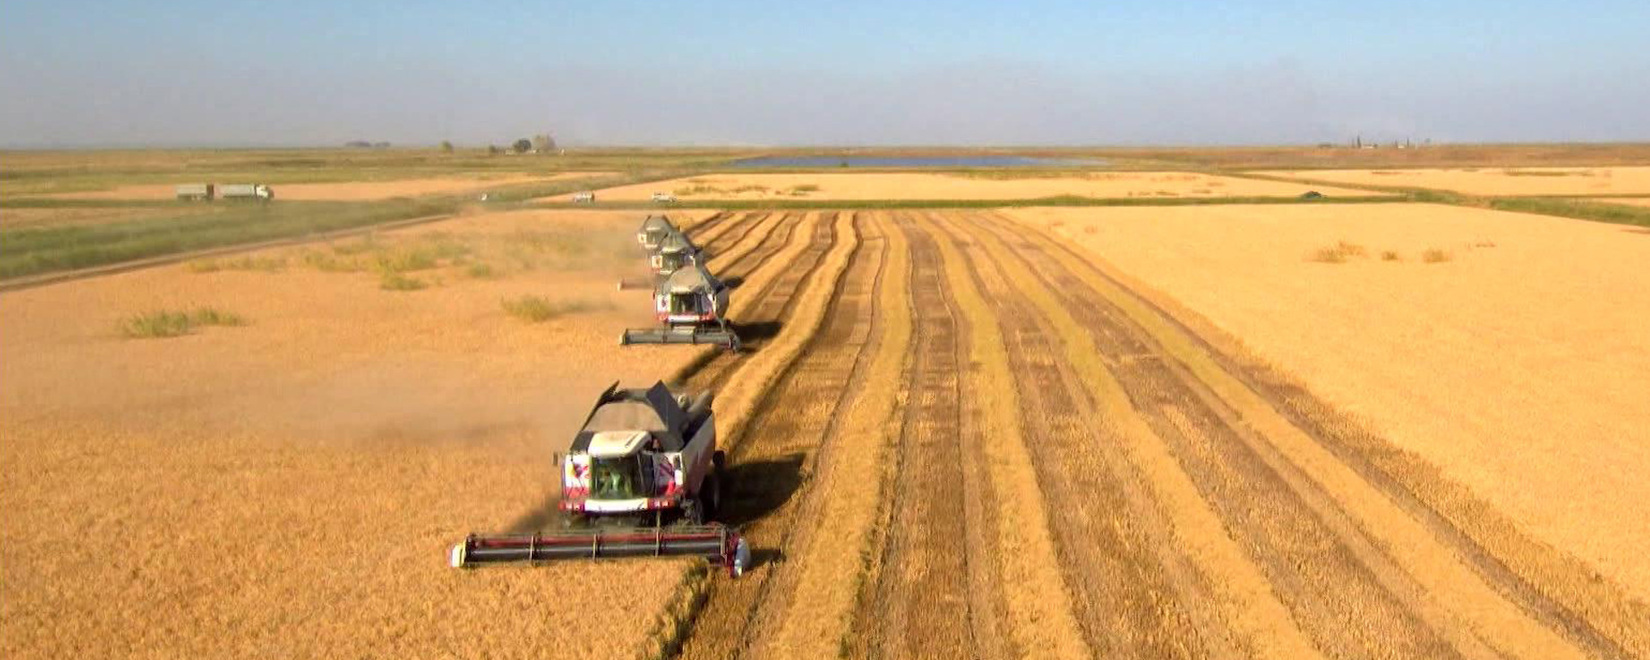 By October 20, the Russian Federation had collected 137.2 million tons of grain